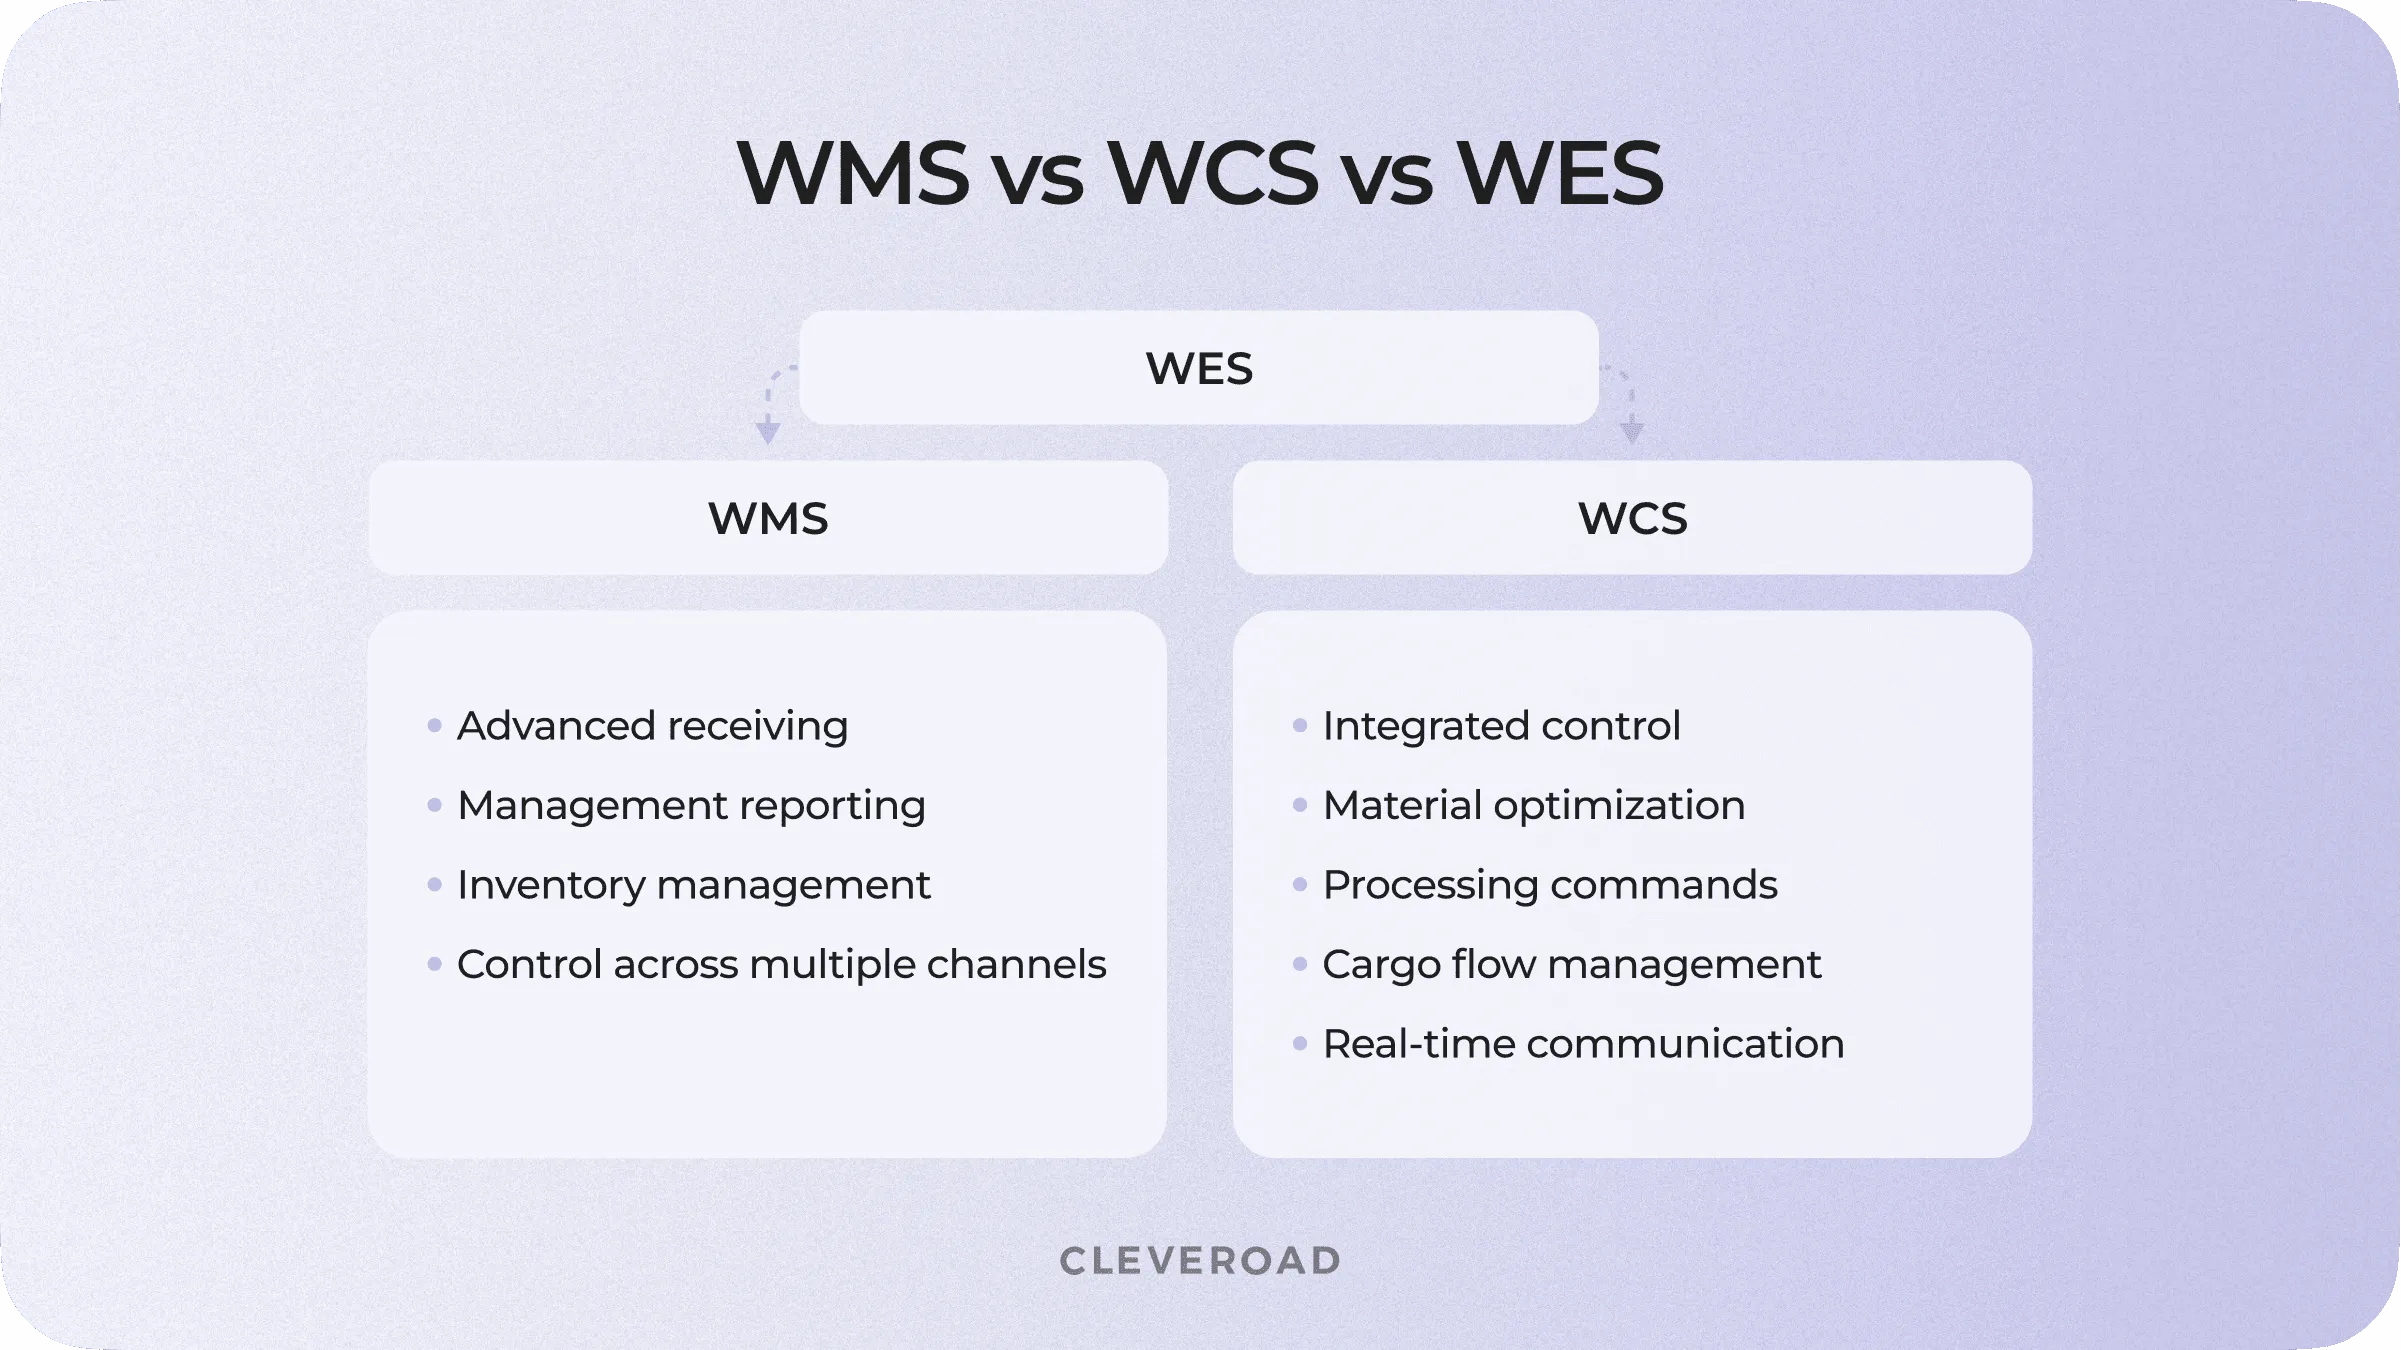 WMS vs WCS vs WES compared